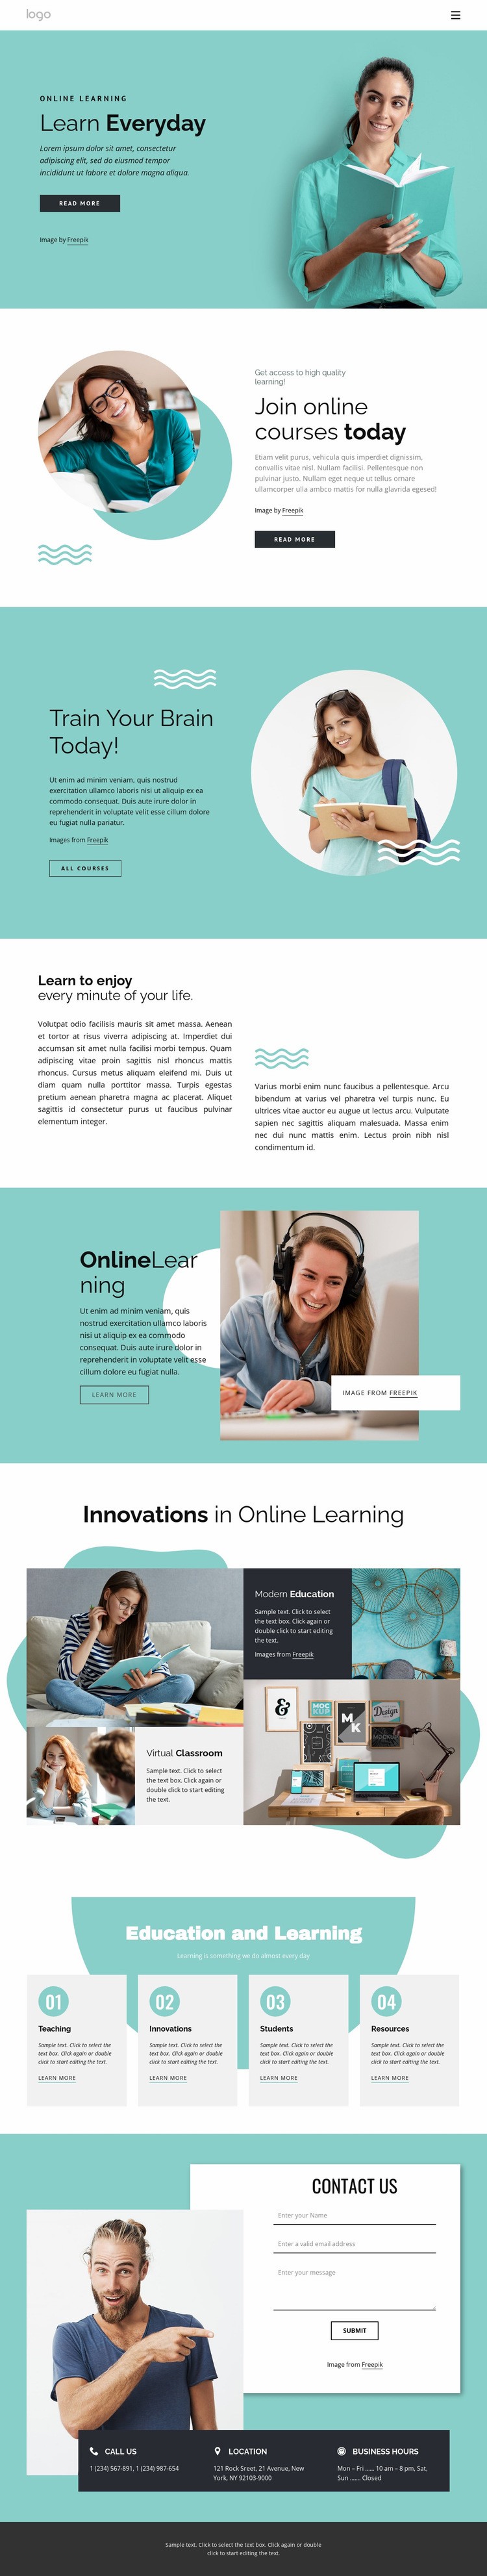 Learning is a lifelong process Wix Template Alternative